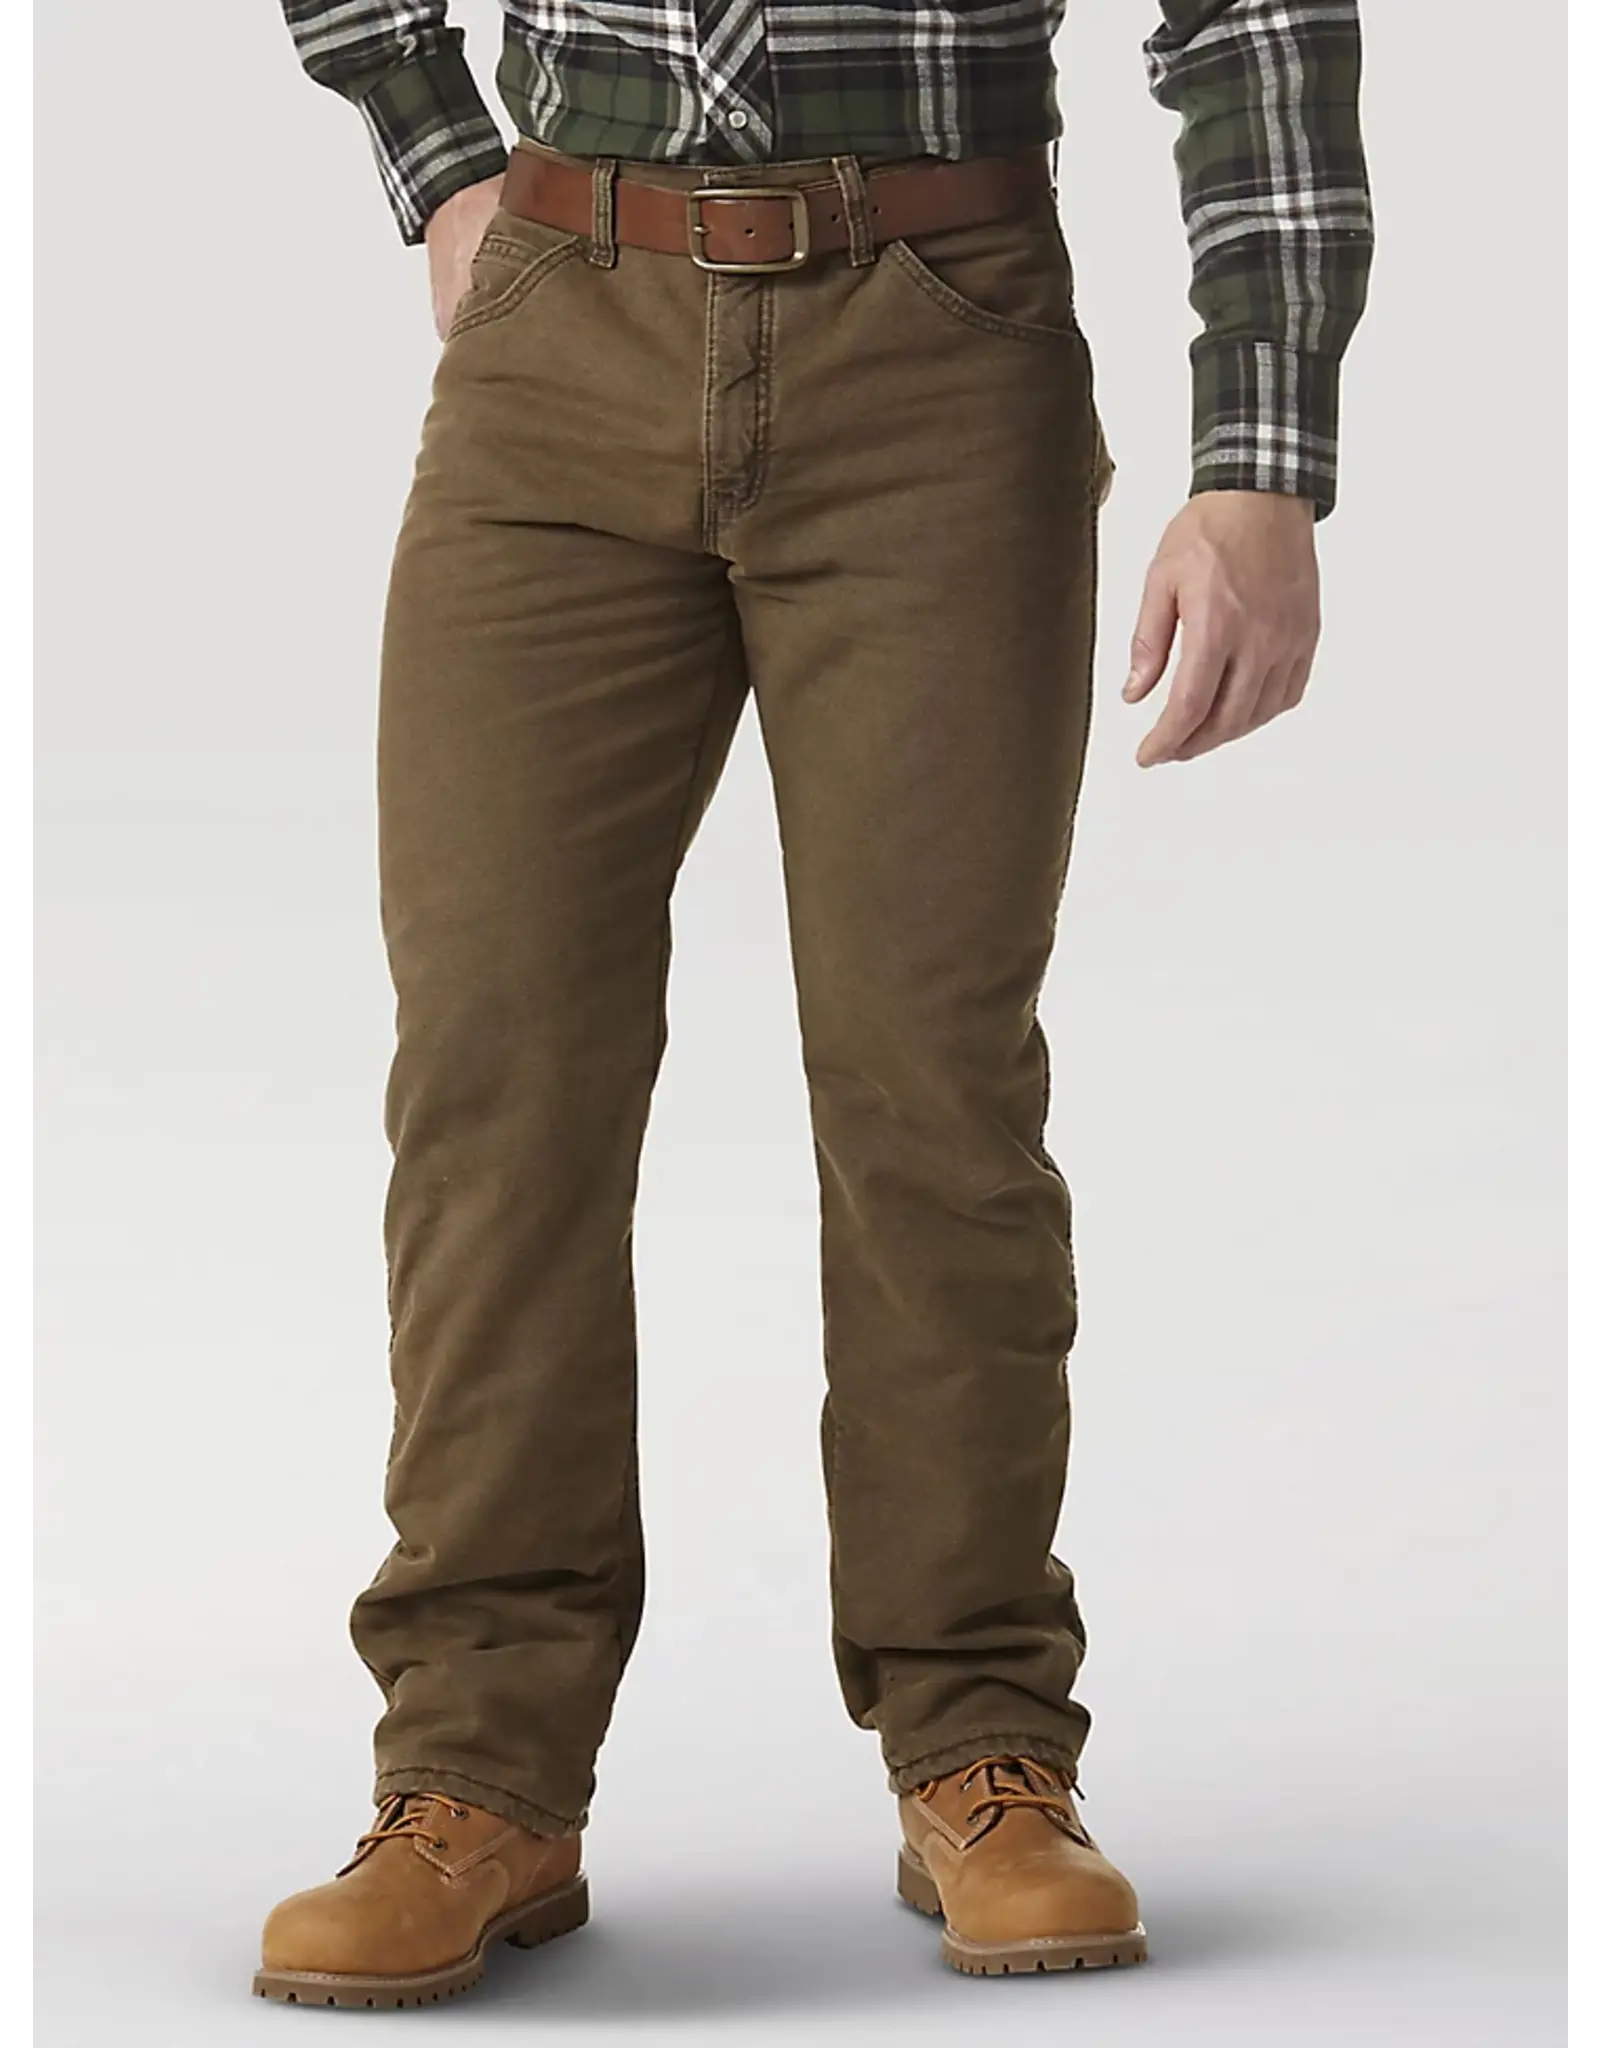 THINSULATE JEANS RELAXED FIT - Smith Army Surplus